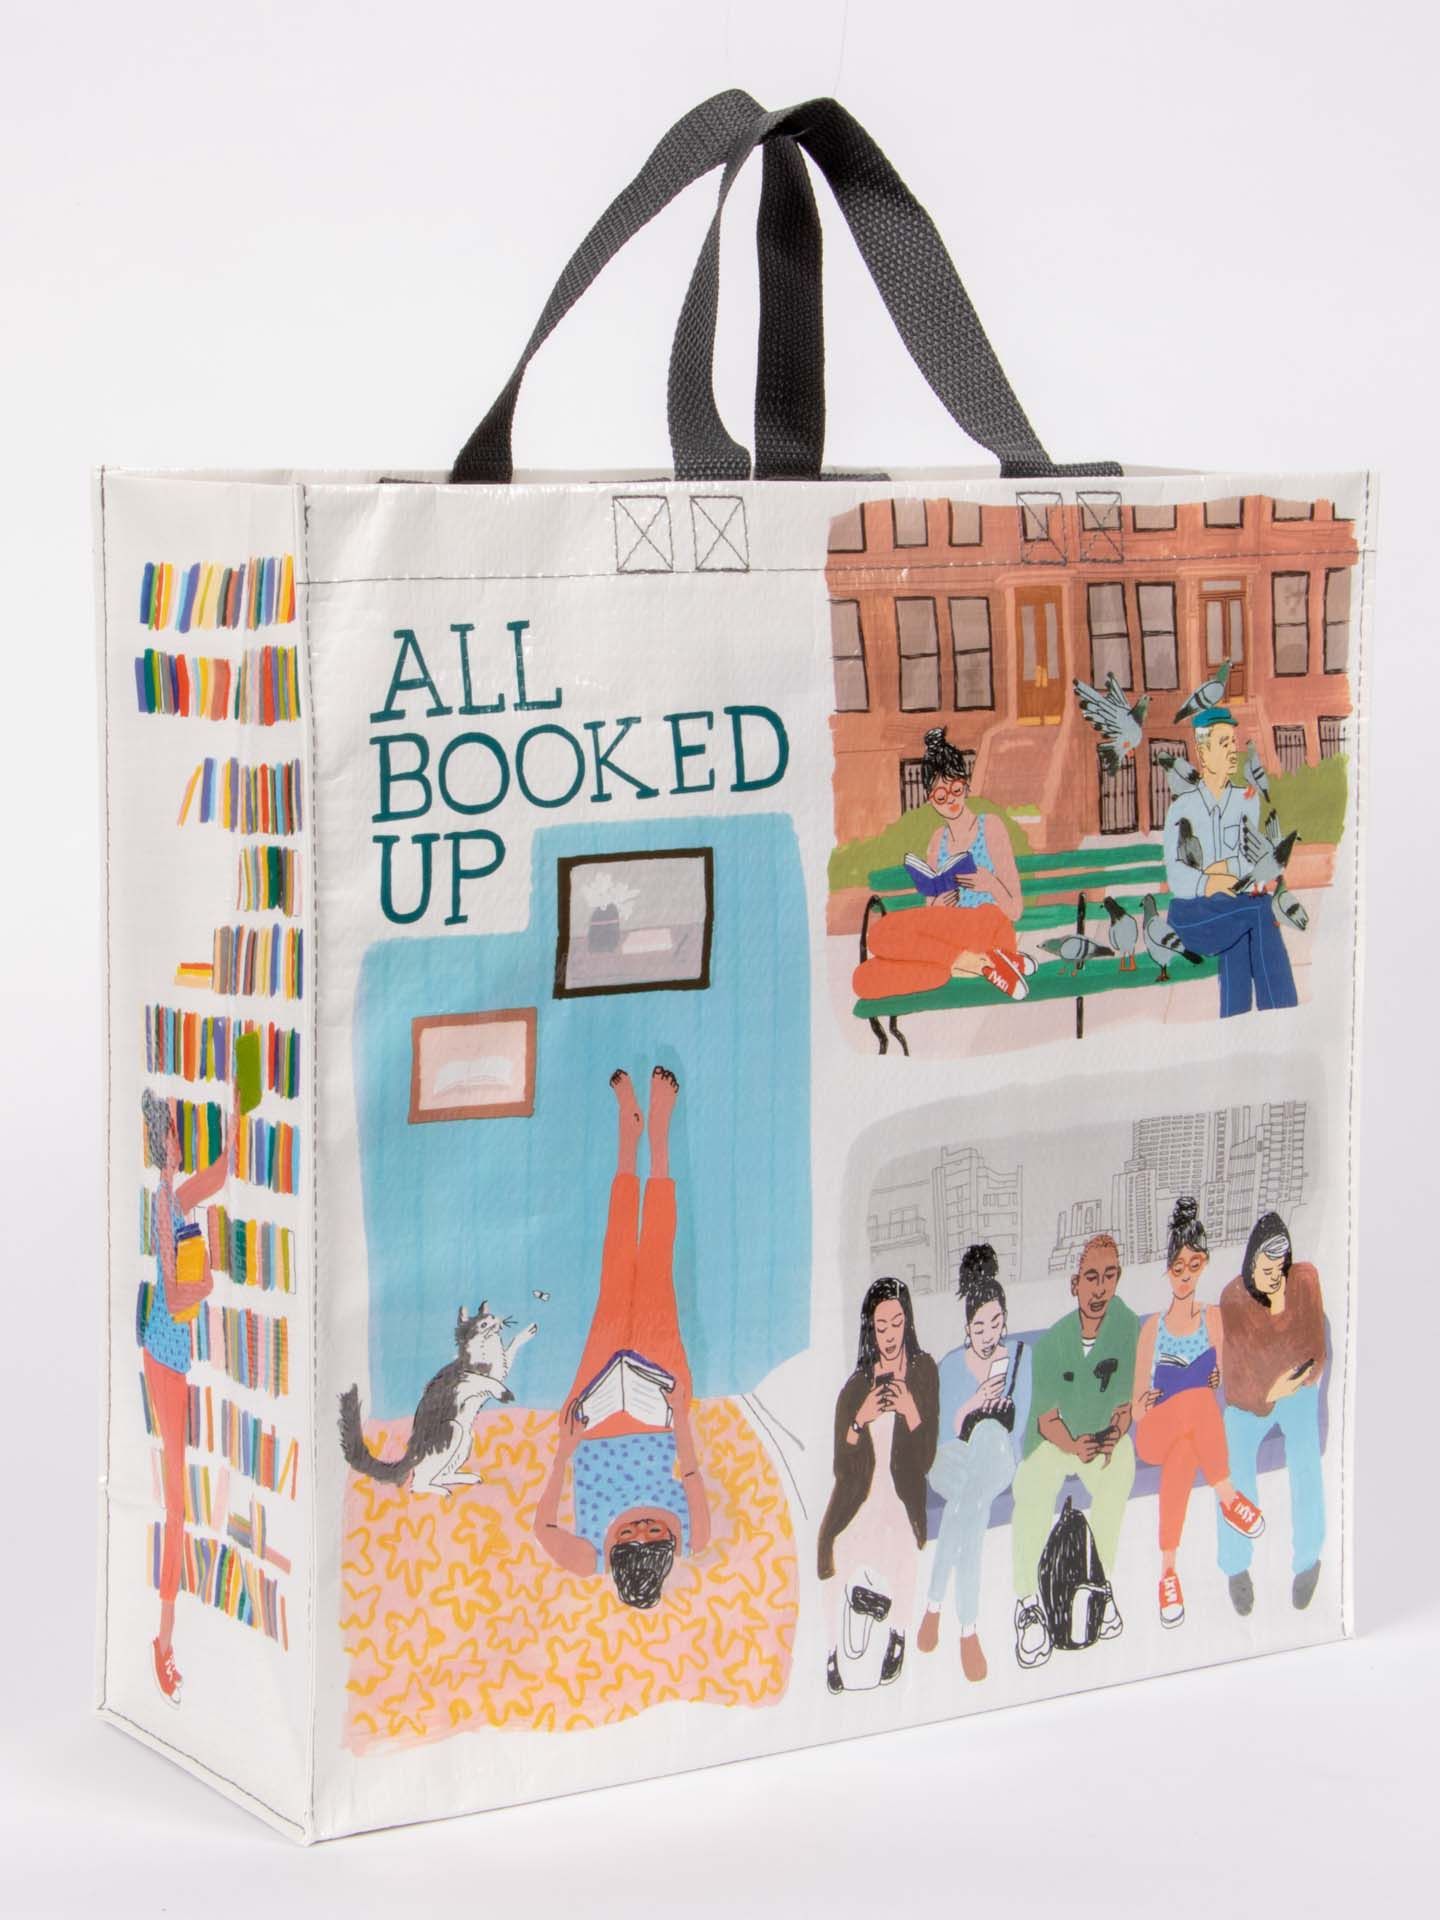 a large ressemble tote bag with scenes of people reading in various environments